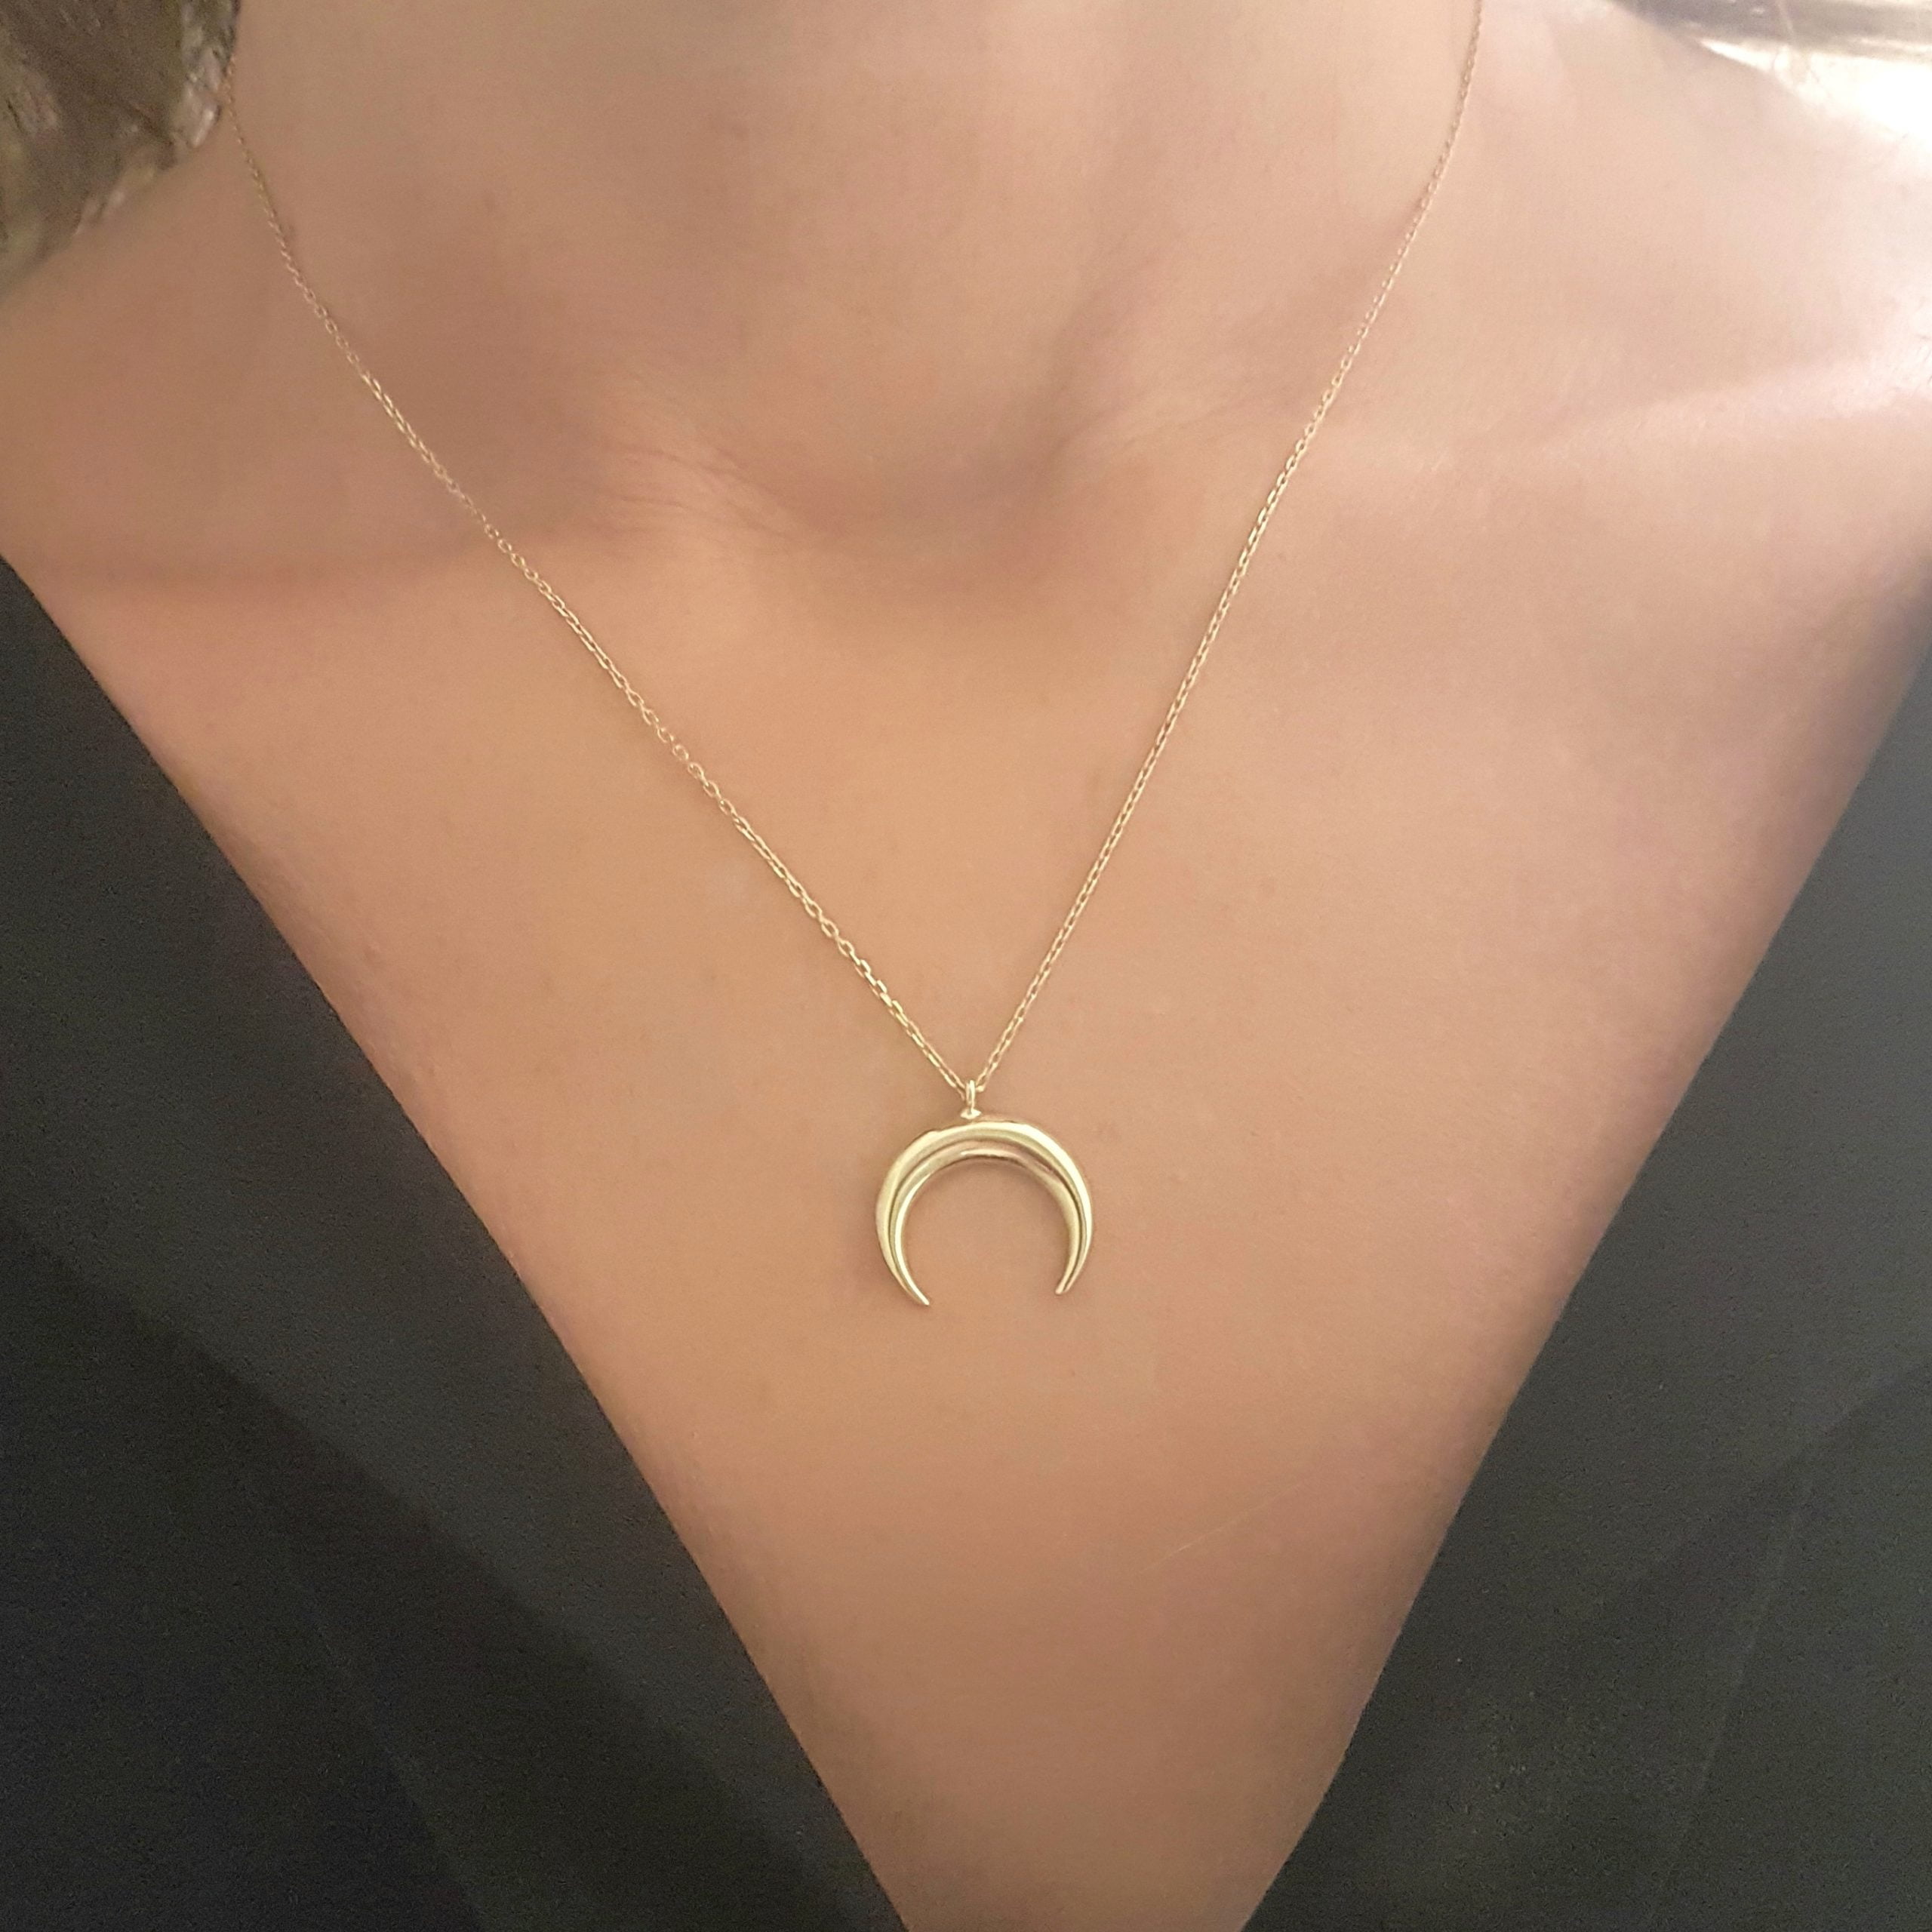 dainty necklace moon necklace double horn Gold crescent necklace everyday jewelry